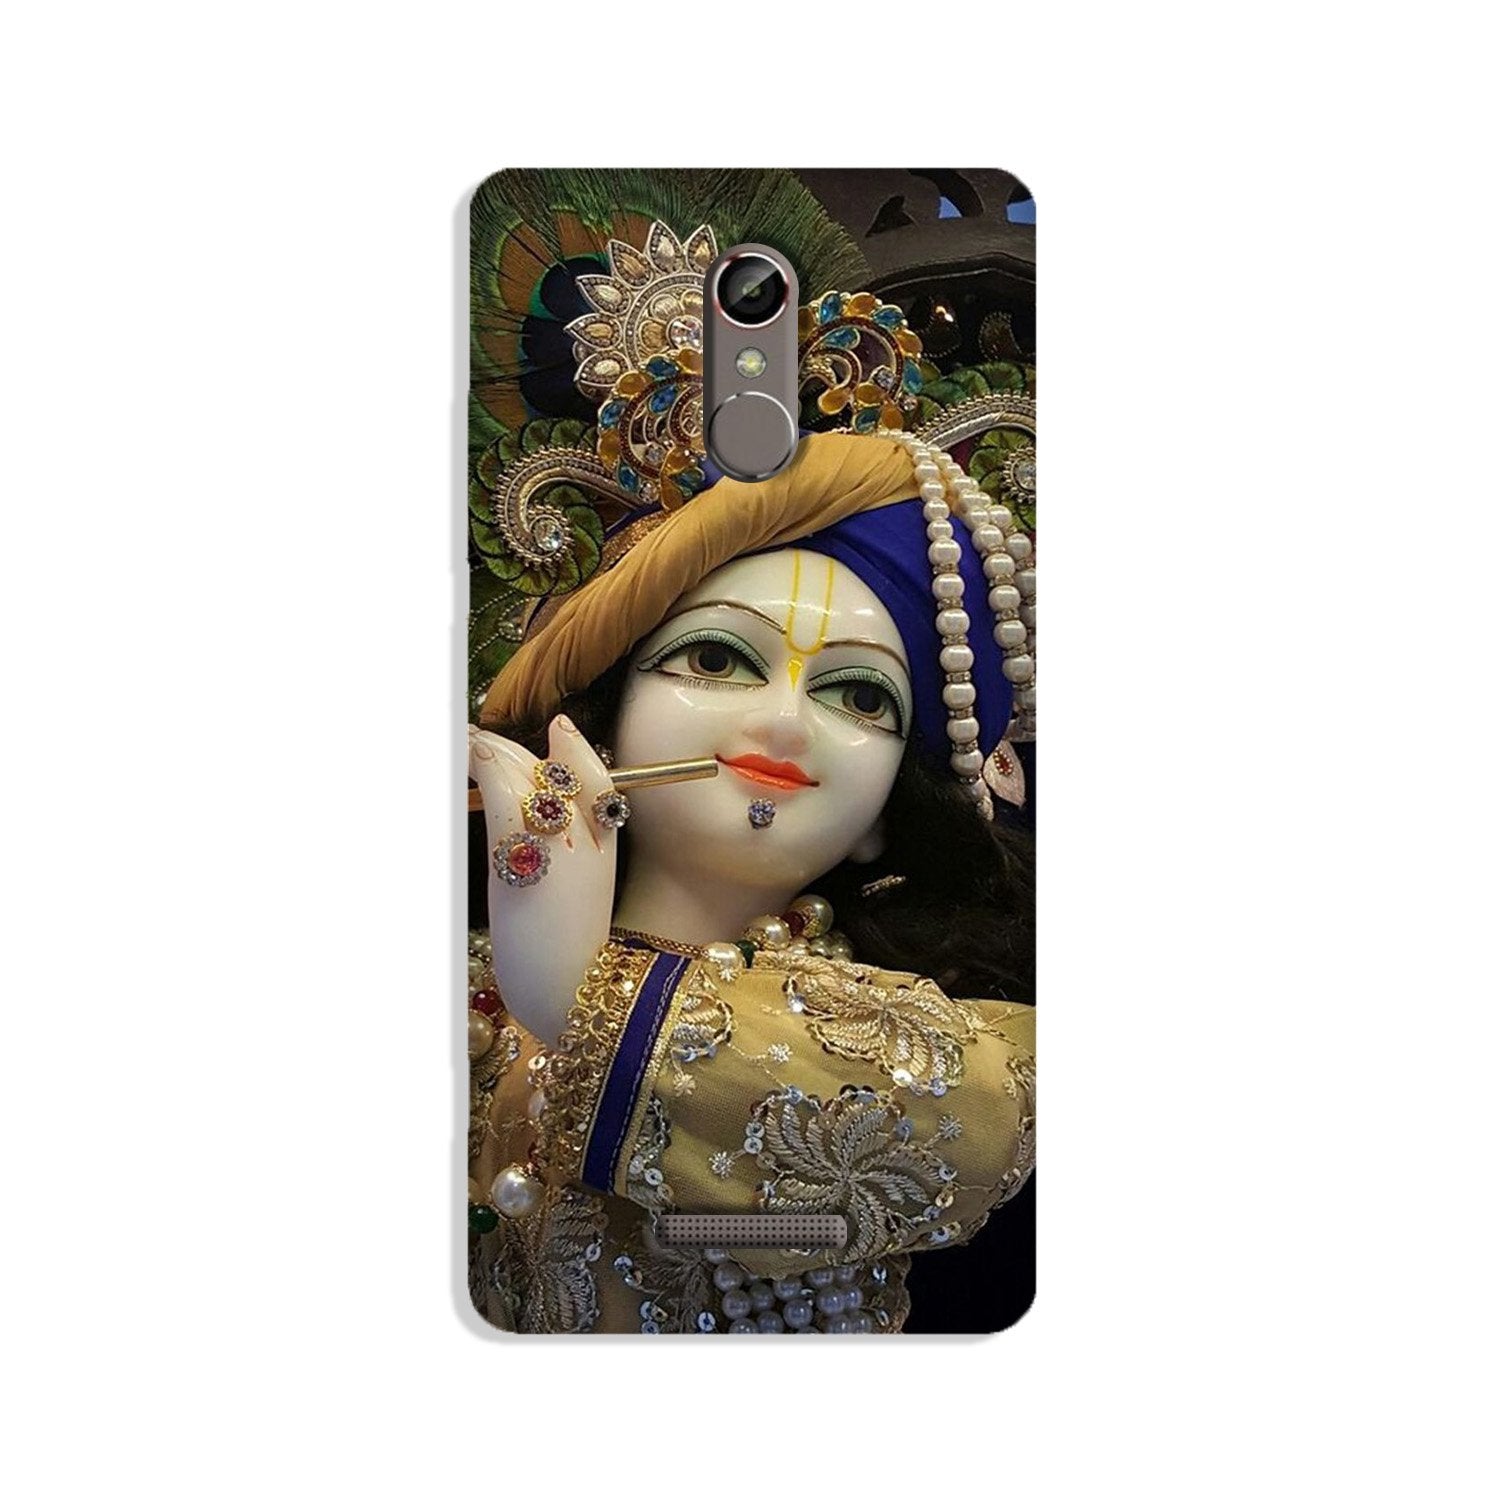 Lord Krishna3 Case for Gionee S6s